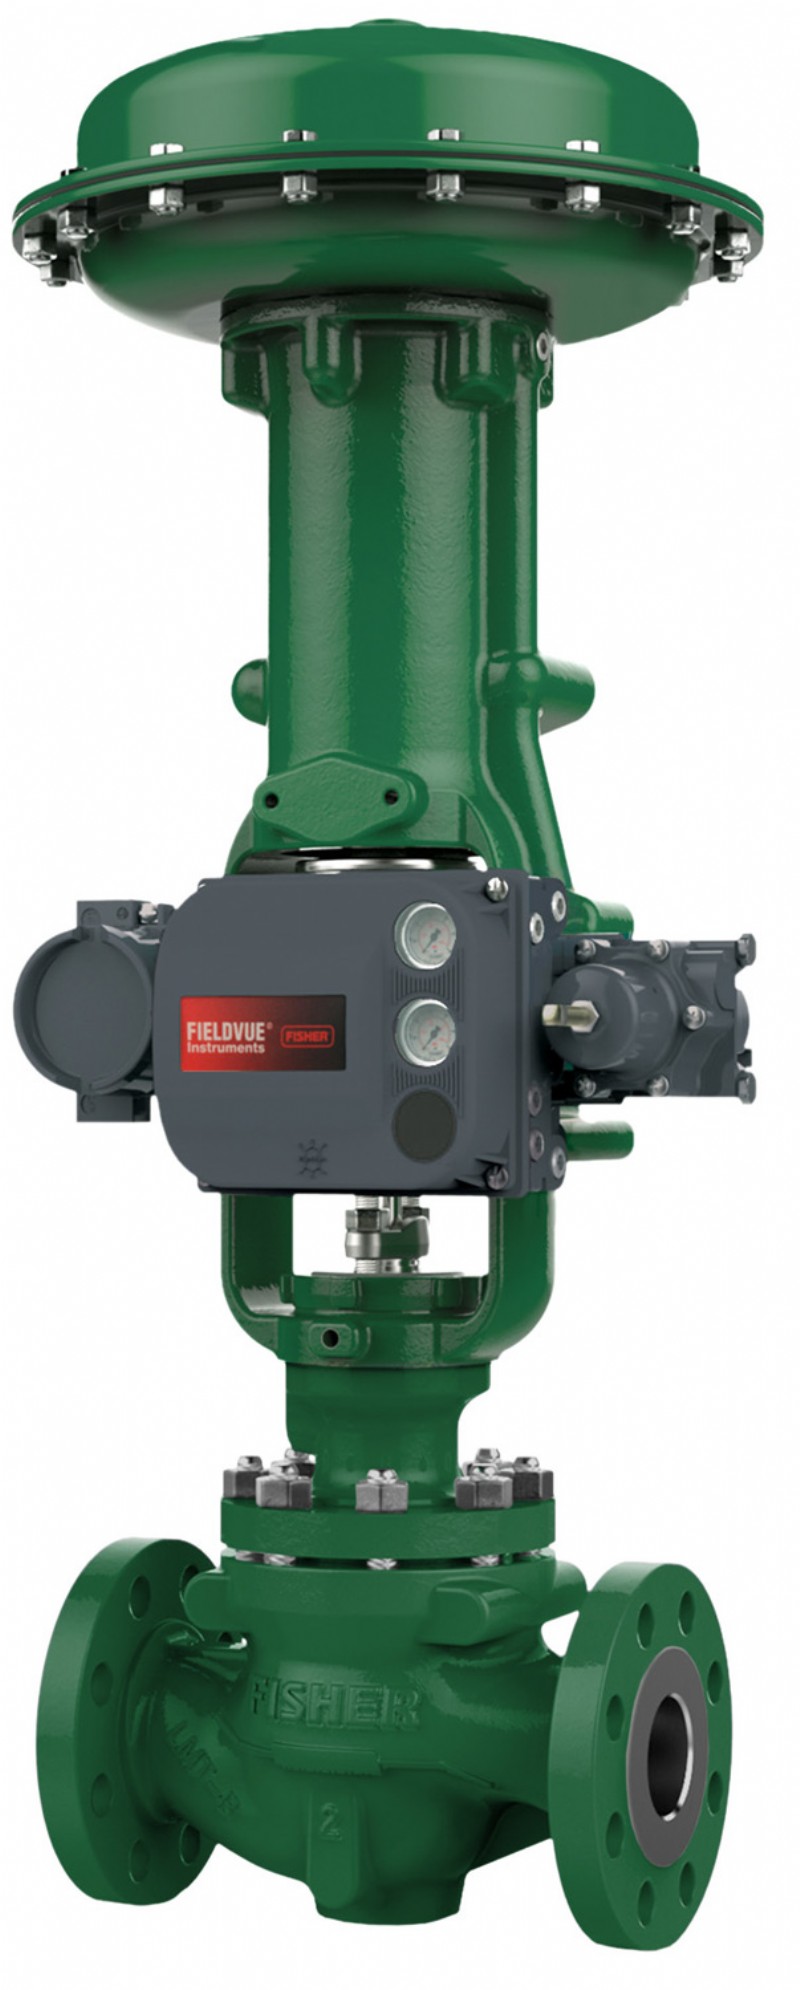 Modern valve technologies, such as this Fisher FIELDVUE Digital Valve Controller 6200, can help power plants reduce costs by providing valve health and performance diagnostics.